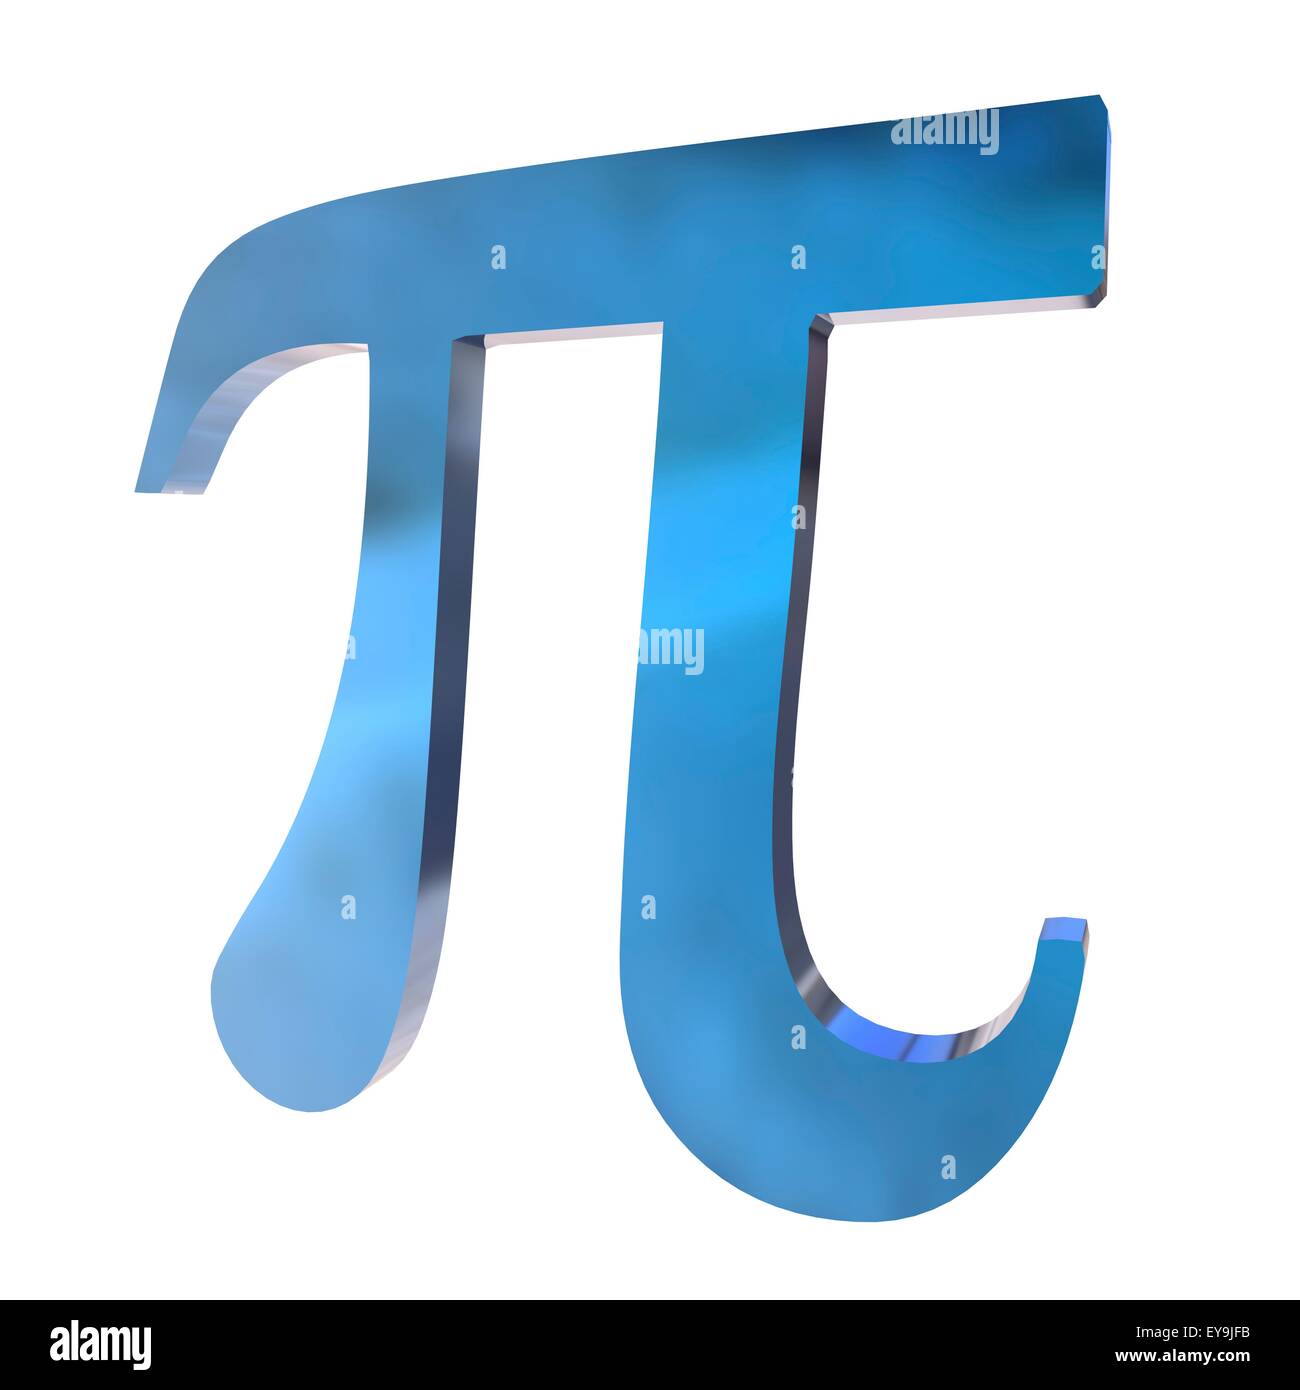 Pi is the sixteenth letter of the Greek alphabet and the symbol used in mathematics to represent a constant â€” the ratio of Stock Photo